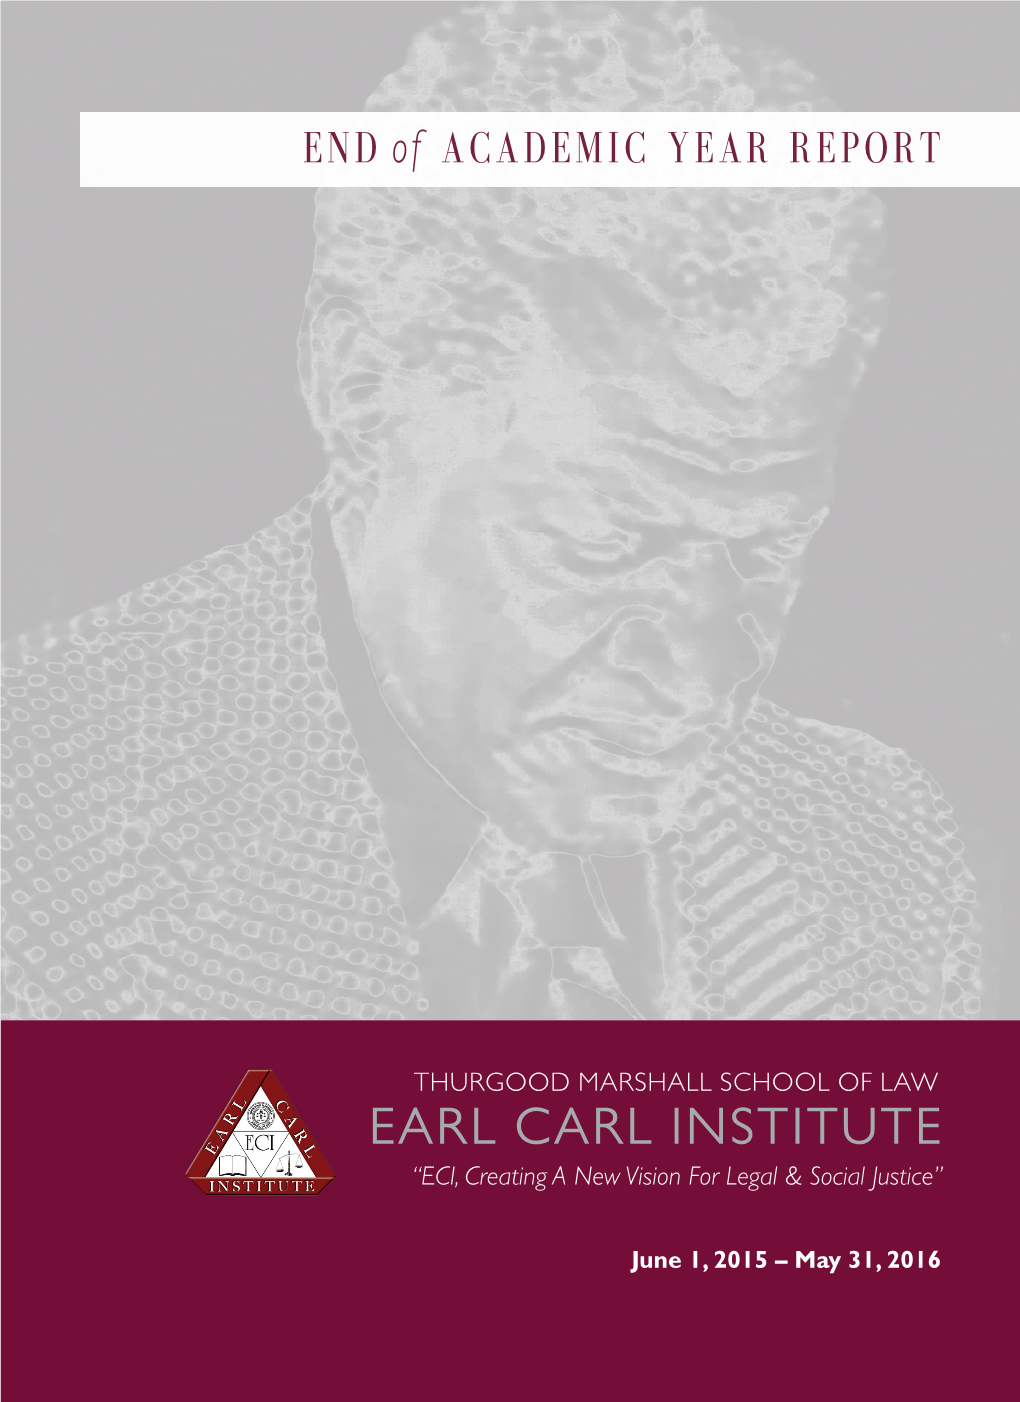 EARL CARL INSTITUTE “ECI, Creating a New Vision for Legal & Social Justice”